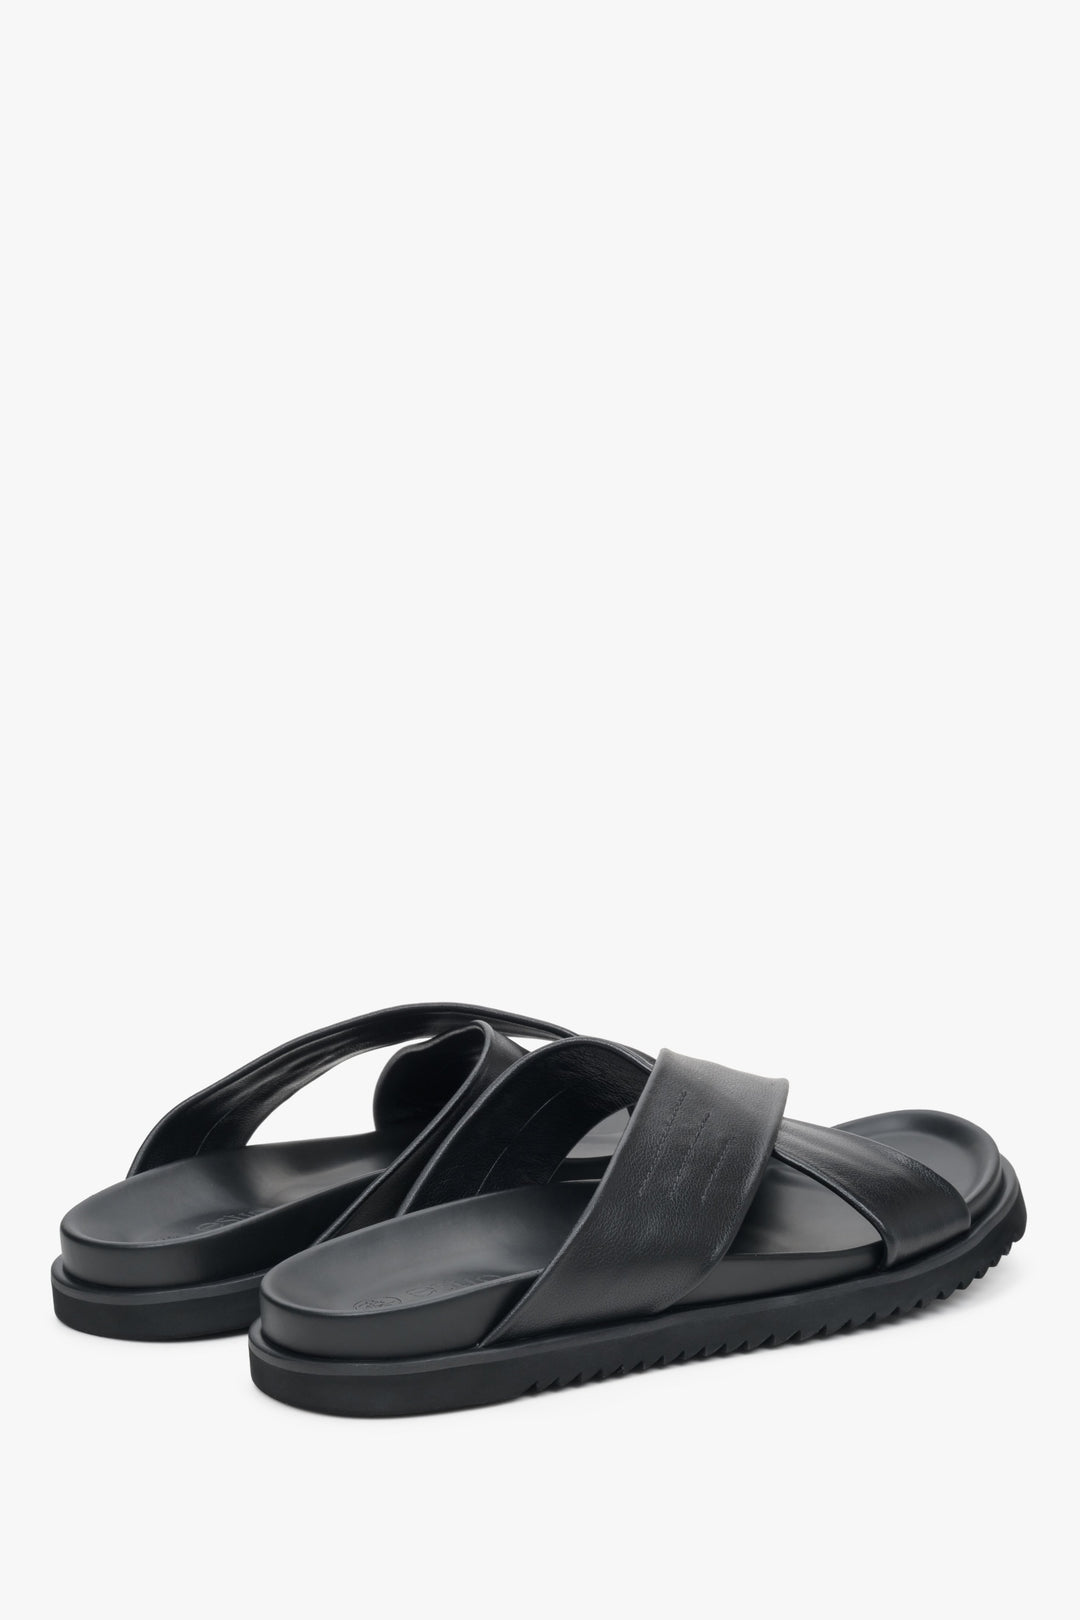 Men's black leather sandals with thick cross straps - close-up on the side line and heel.